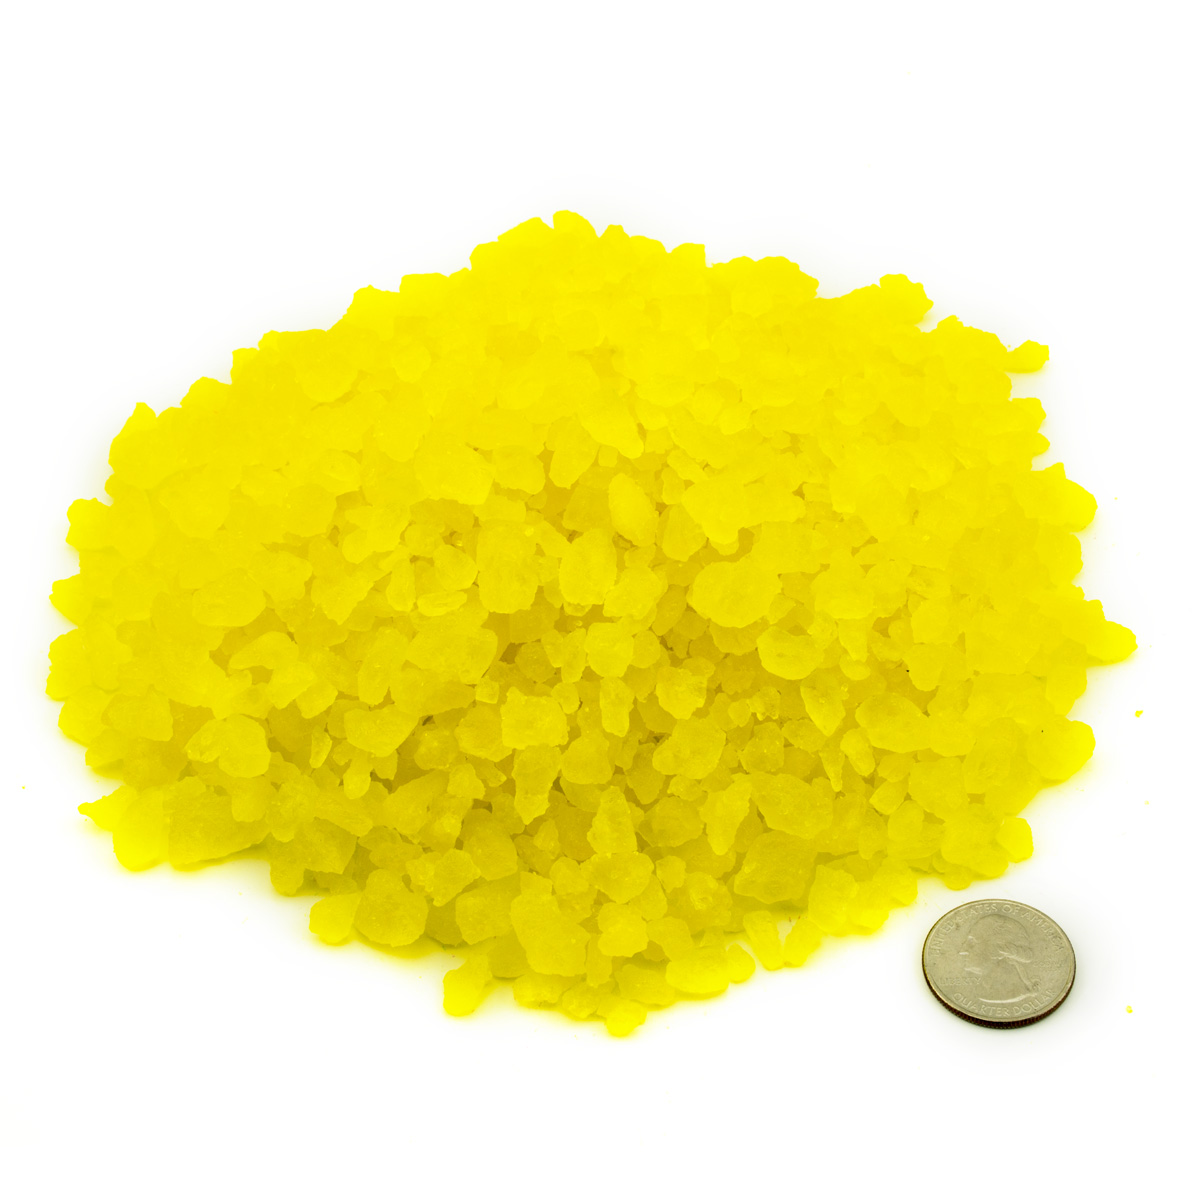 Yellow/Pineapple Rock Candy Crystals i